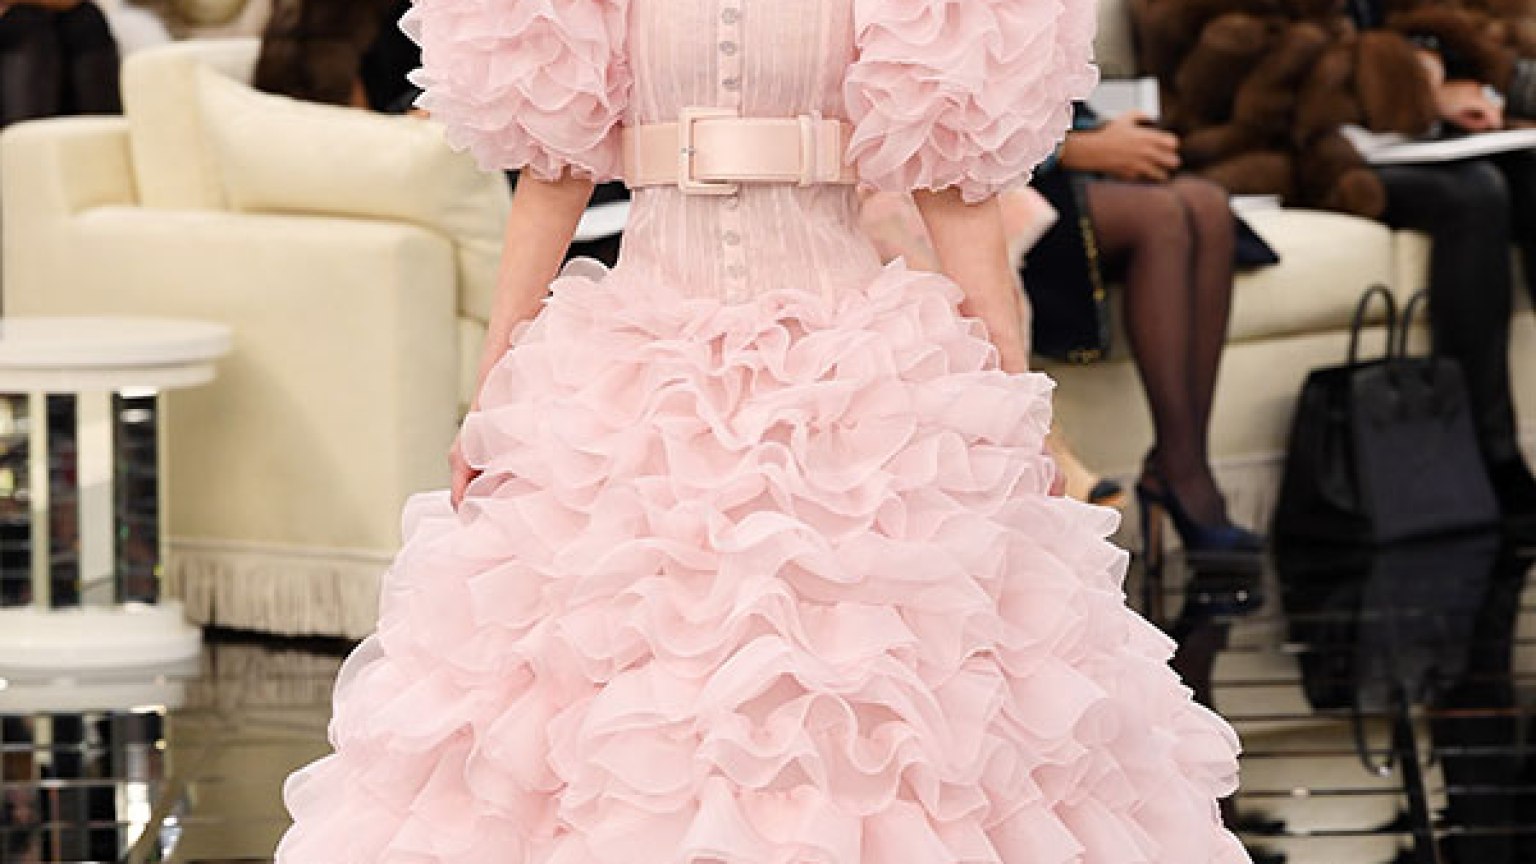 [PIC] Lily-Rose Depp’s Chanel Dress: Stunning Pink Ruffled Gown At PFW ...